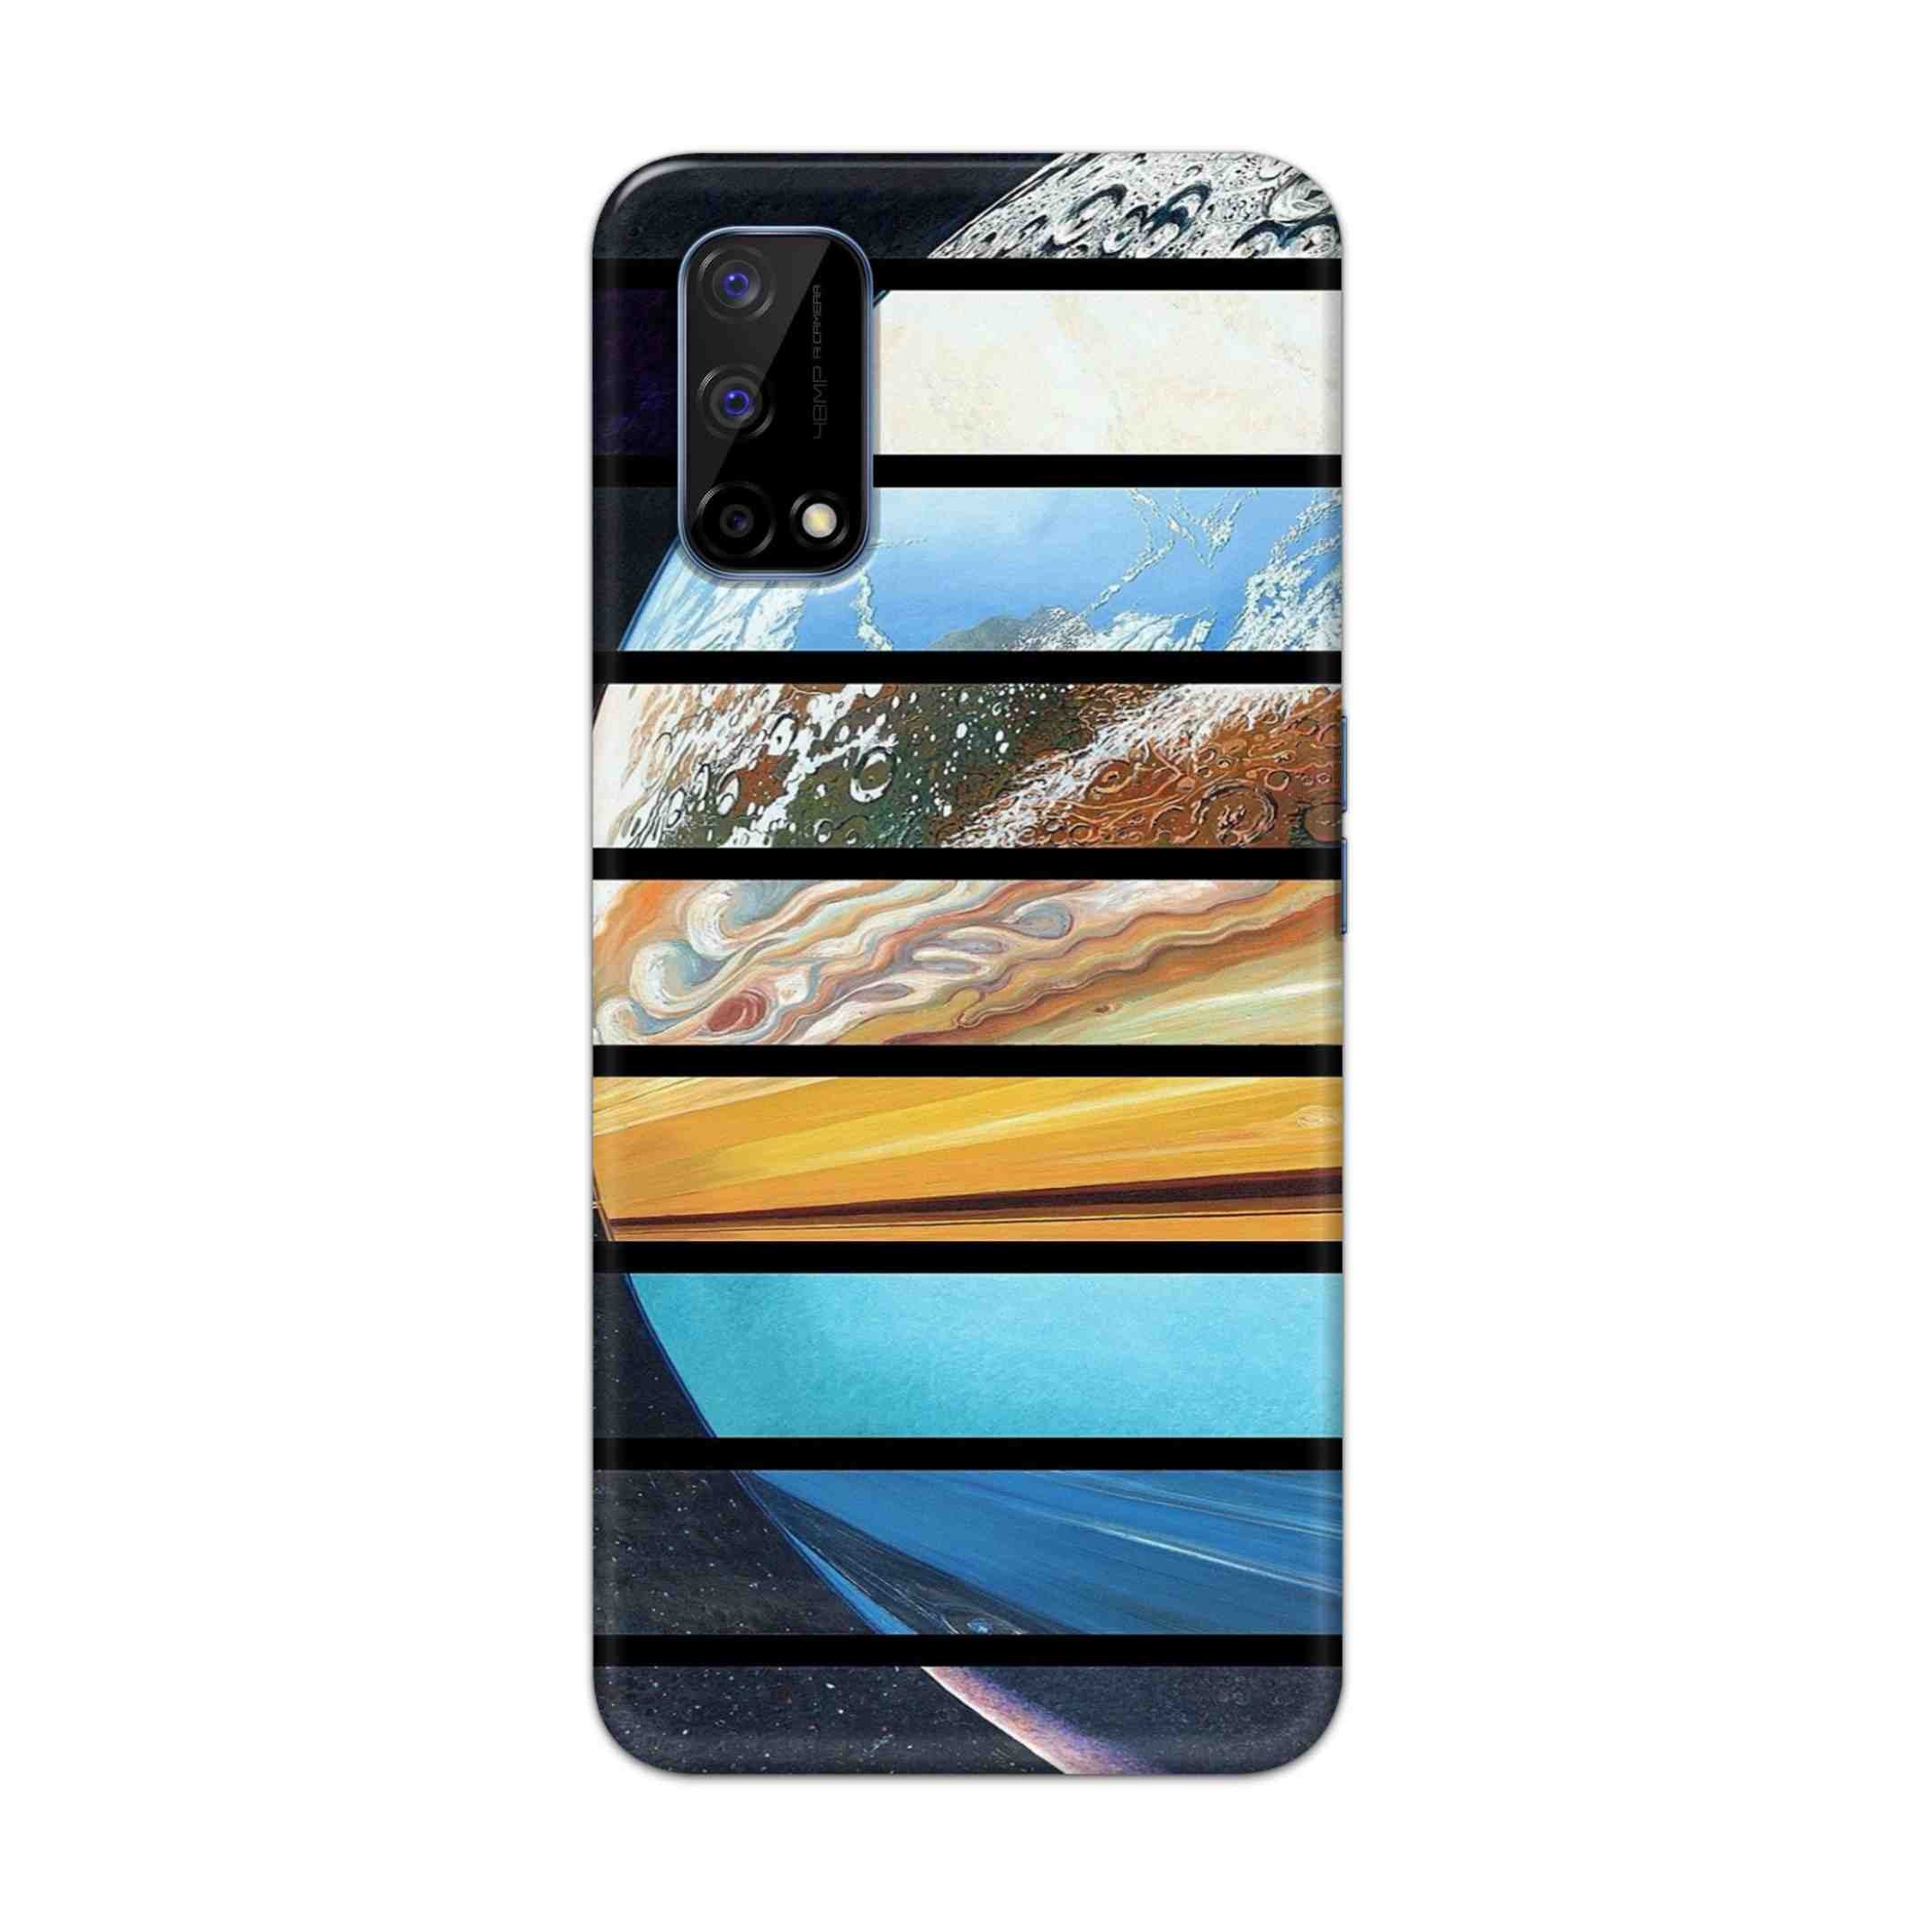 Buy Colourful Earth Hard Back Mobile Phone Case Cover For Realme Narzo 30 Pro Online